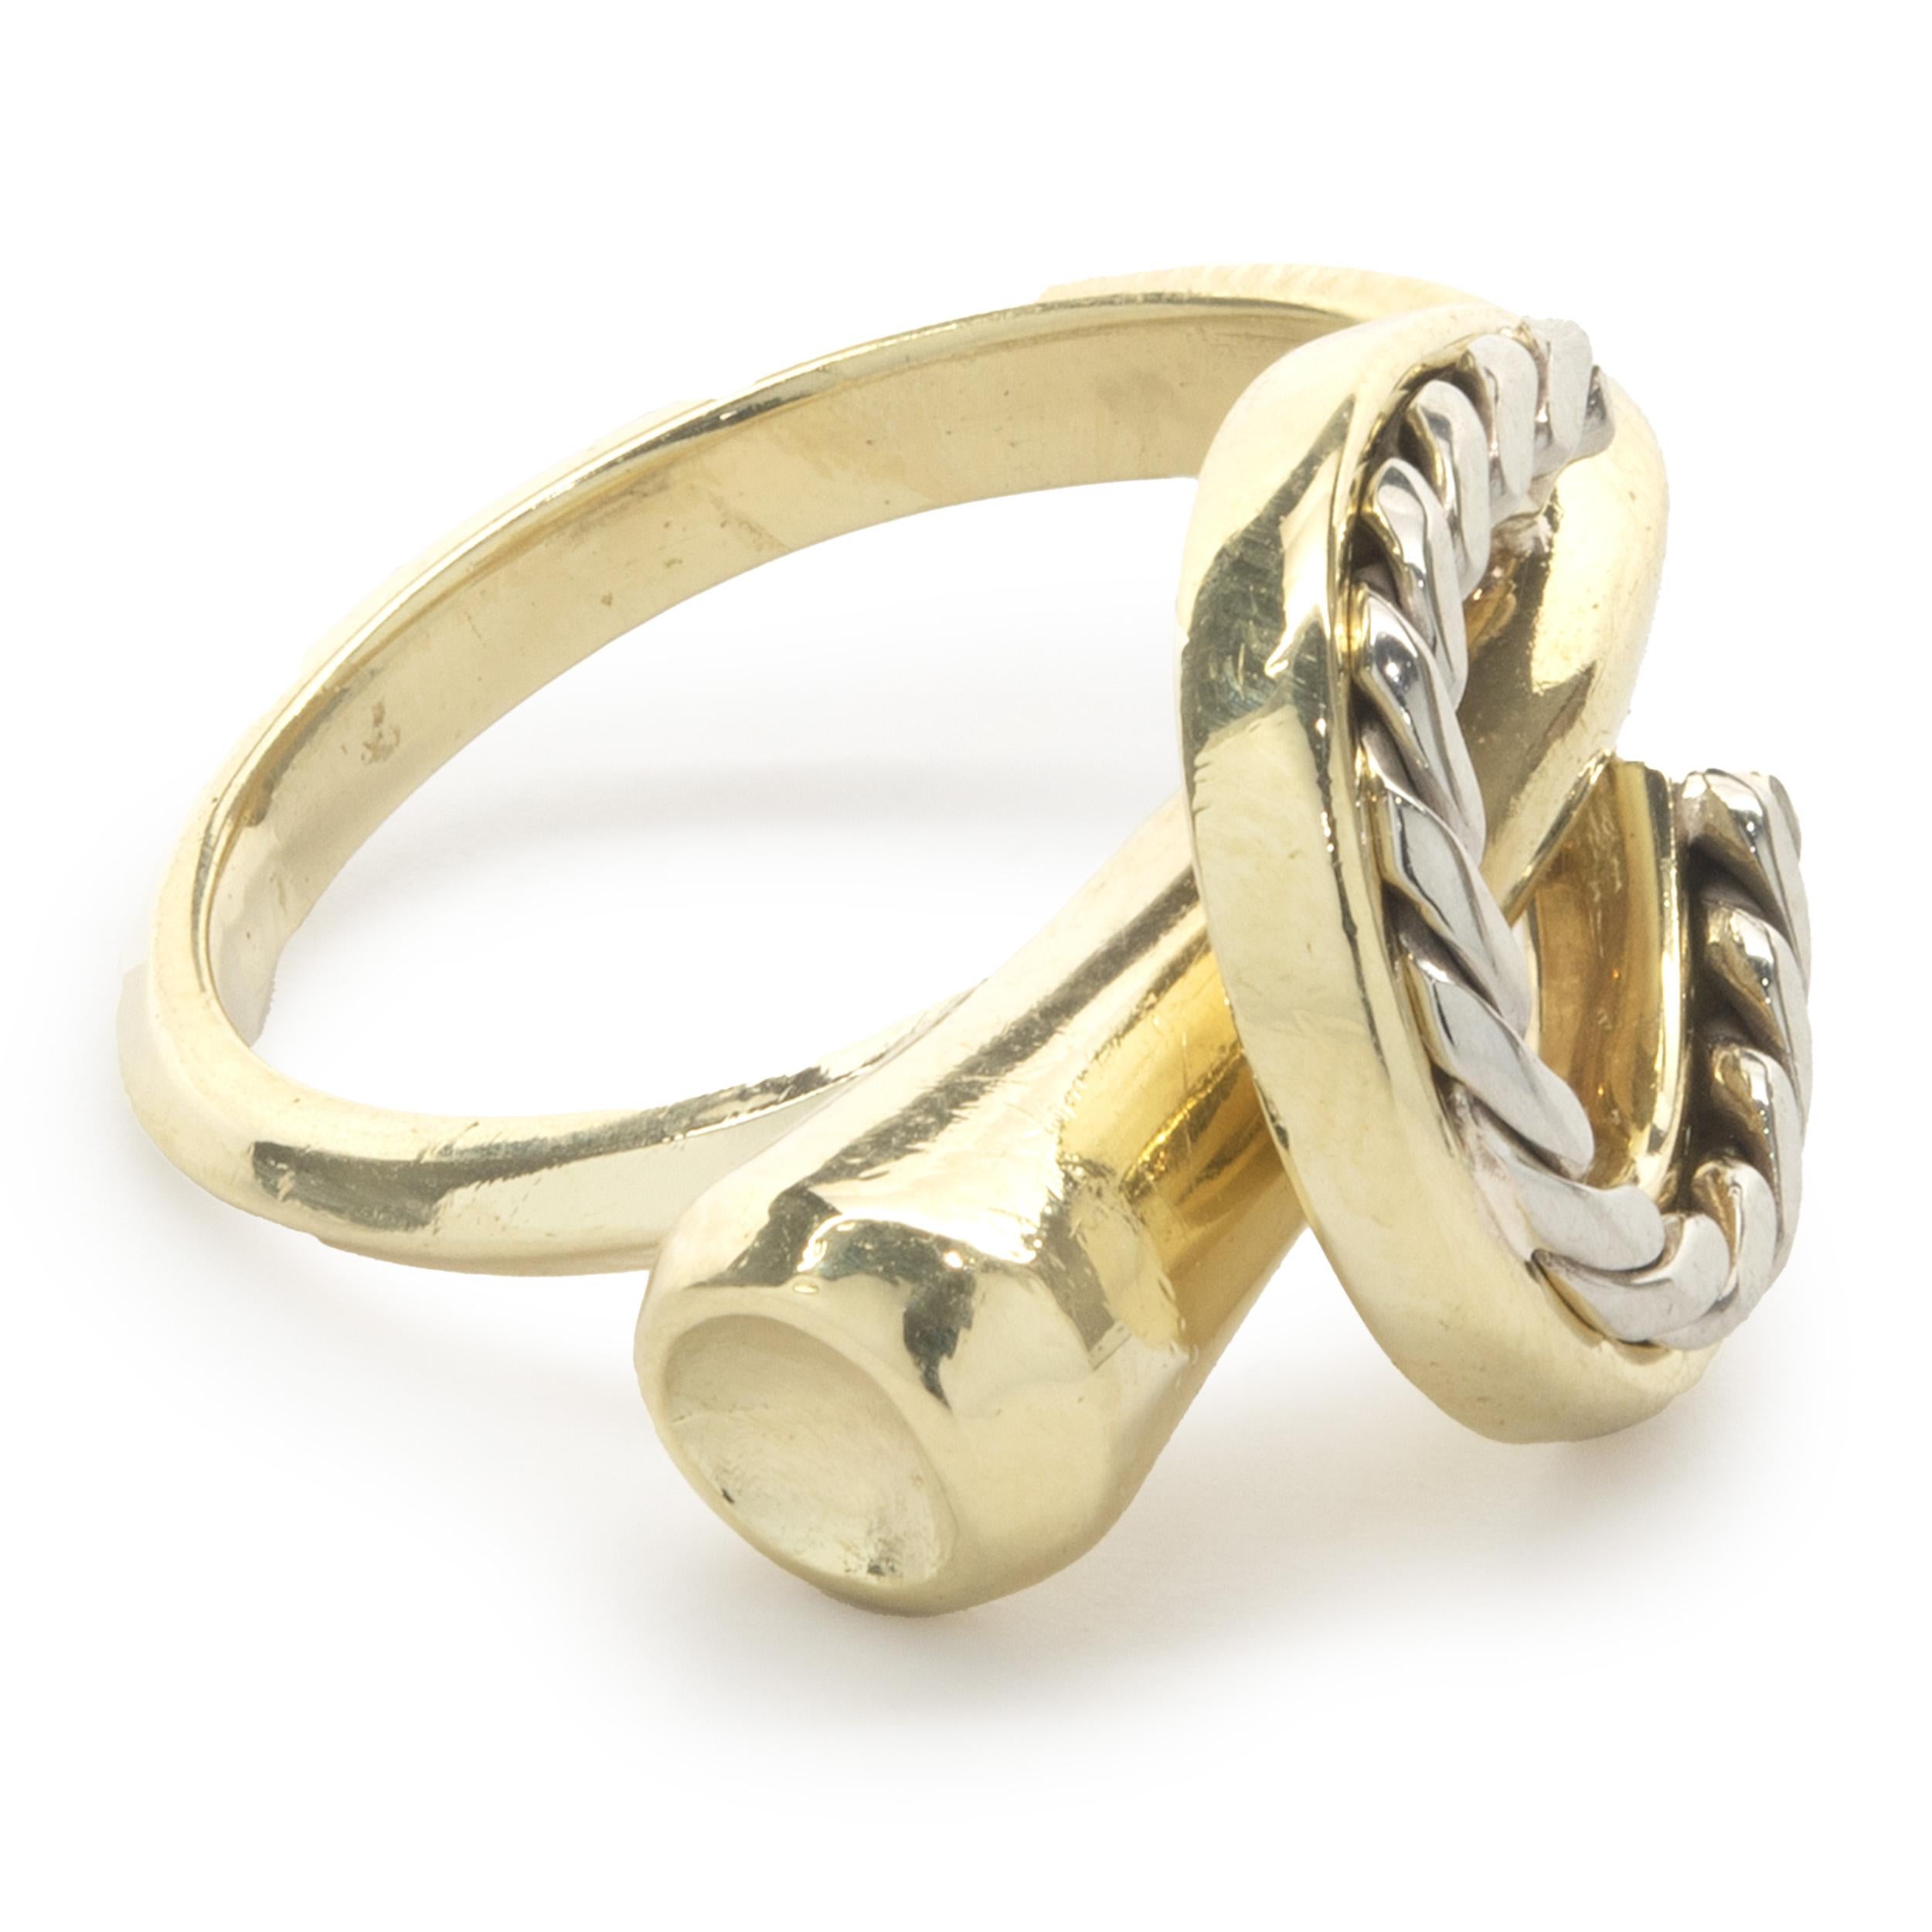 Designer: custom design
Material: 18K yellow gold
Dimensions: ring top measures 12mm wide
Size: 4
Weight: 7.39 grams
